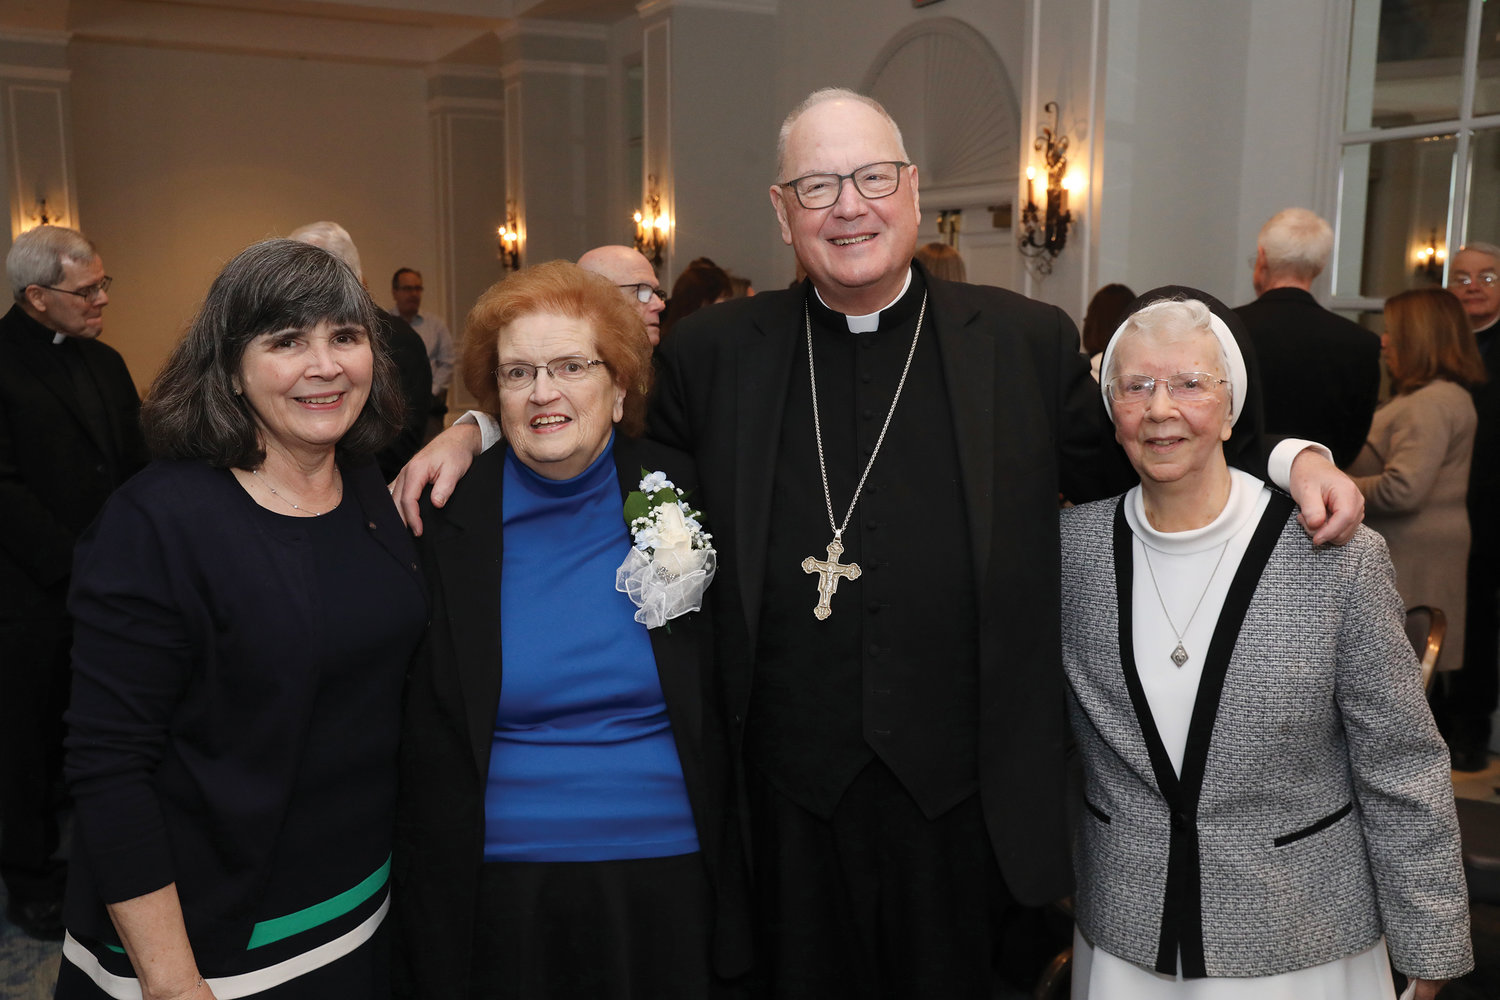 The Catholic School Region of Rockland celebrates its third annual Catholic Schools Breakfast for 335 guests at the Hilton Pearl River March 31. Pictured with Cardinal Dolan are three honorees, from left: Mary Leahy, CEO of Bon Secours Charity Health System, who received the Our Lady of the Rosary Leadership Award, and two retired principals who were presented the St. Dominic Legacy Award: Margaret Hamilton, who served at St. Peter School in Haverstraw from 2002 to 2013, and Sister Stephen Gerard, O.P., who was at St. Paul School in Valley Cottage from 1974 to 2016. More than $60,000 was raised to support scholarships, capital improvements and technology enhancements in the Catholic School Region of Rockland, which provides scholarships for more than 1,200 students in five schools each year.